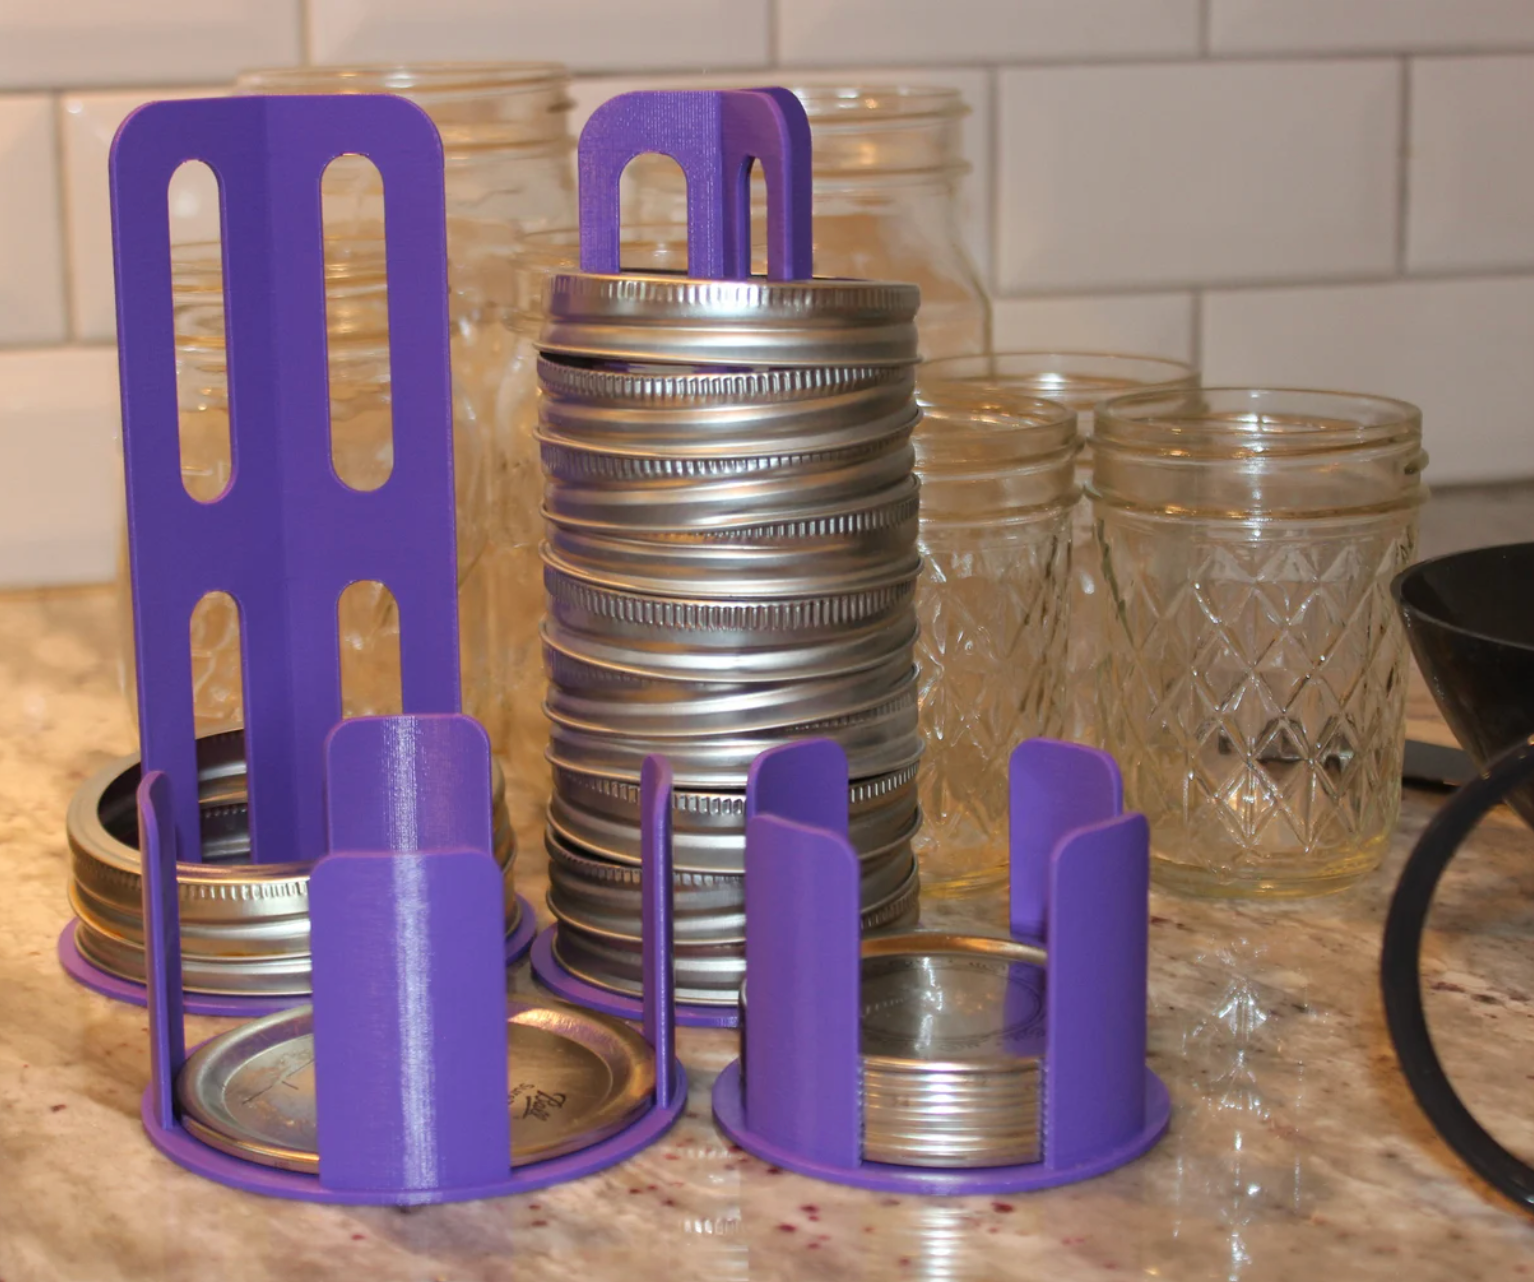 the canning organizers in purple